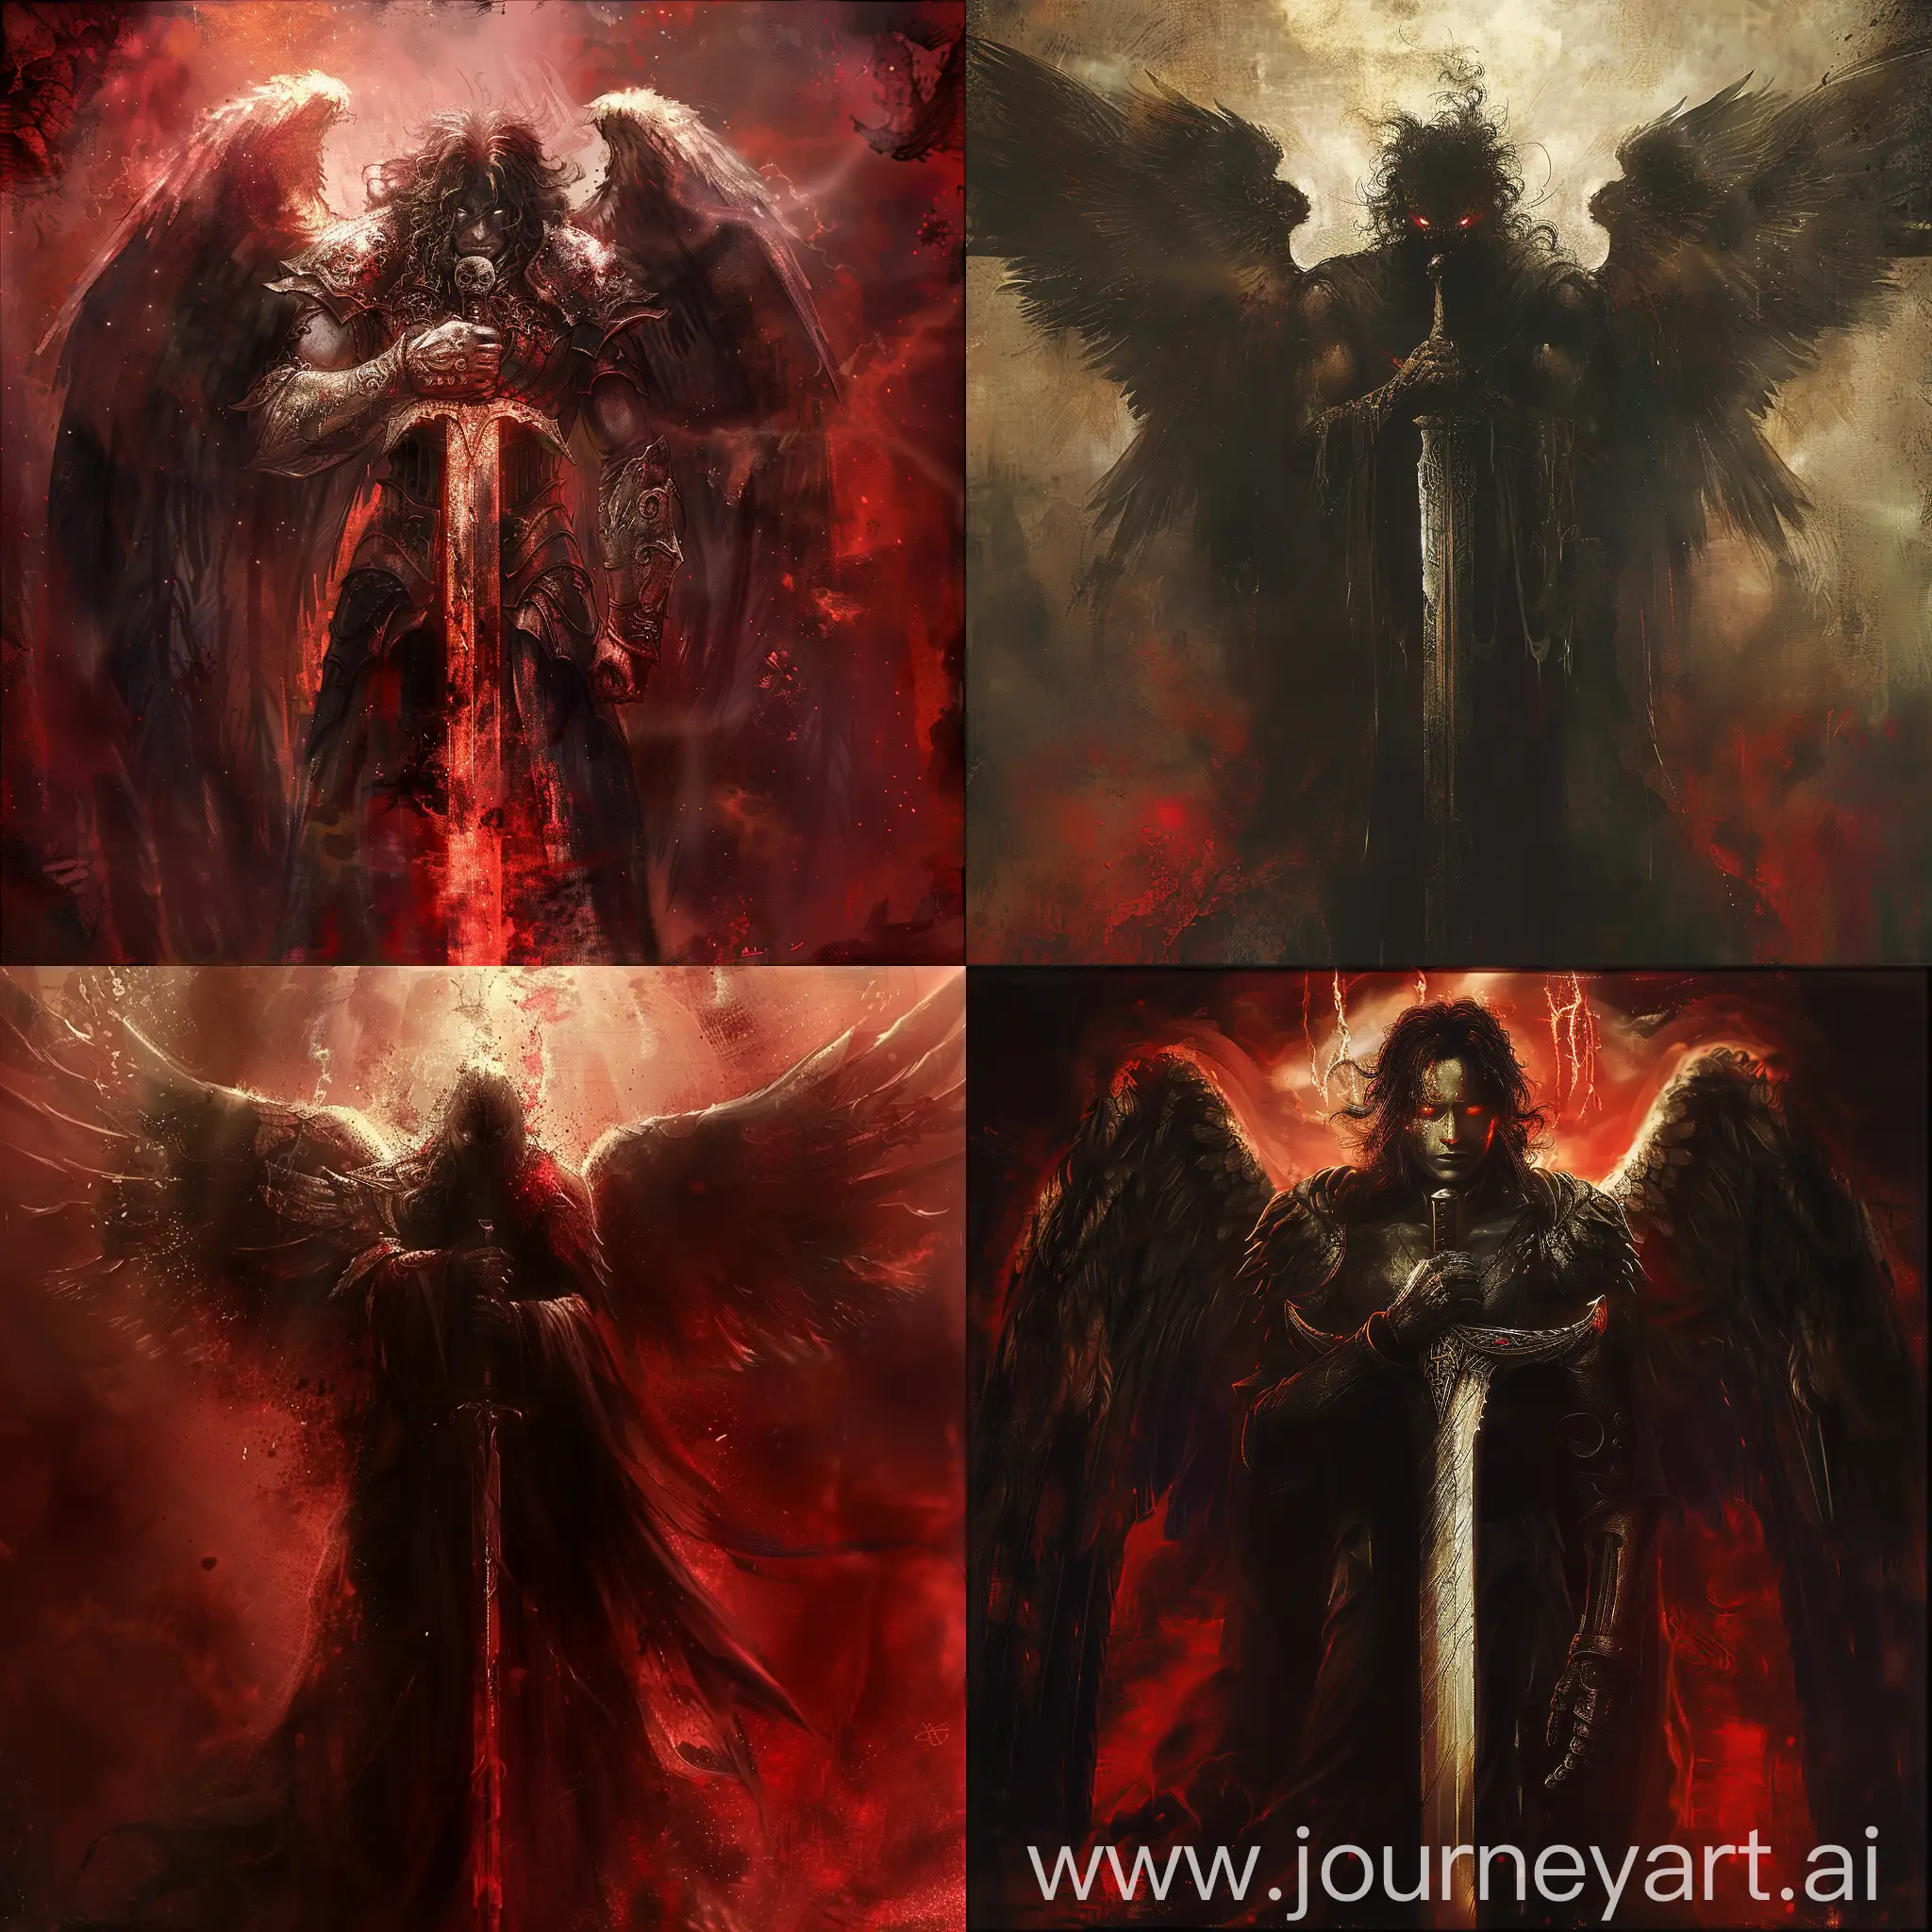 Cursed-FourWinged-Angel-with-Fiery-Sword-and-Intense-Hatred